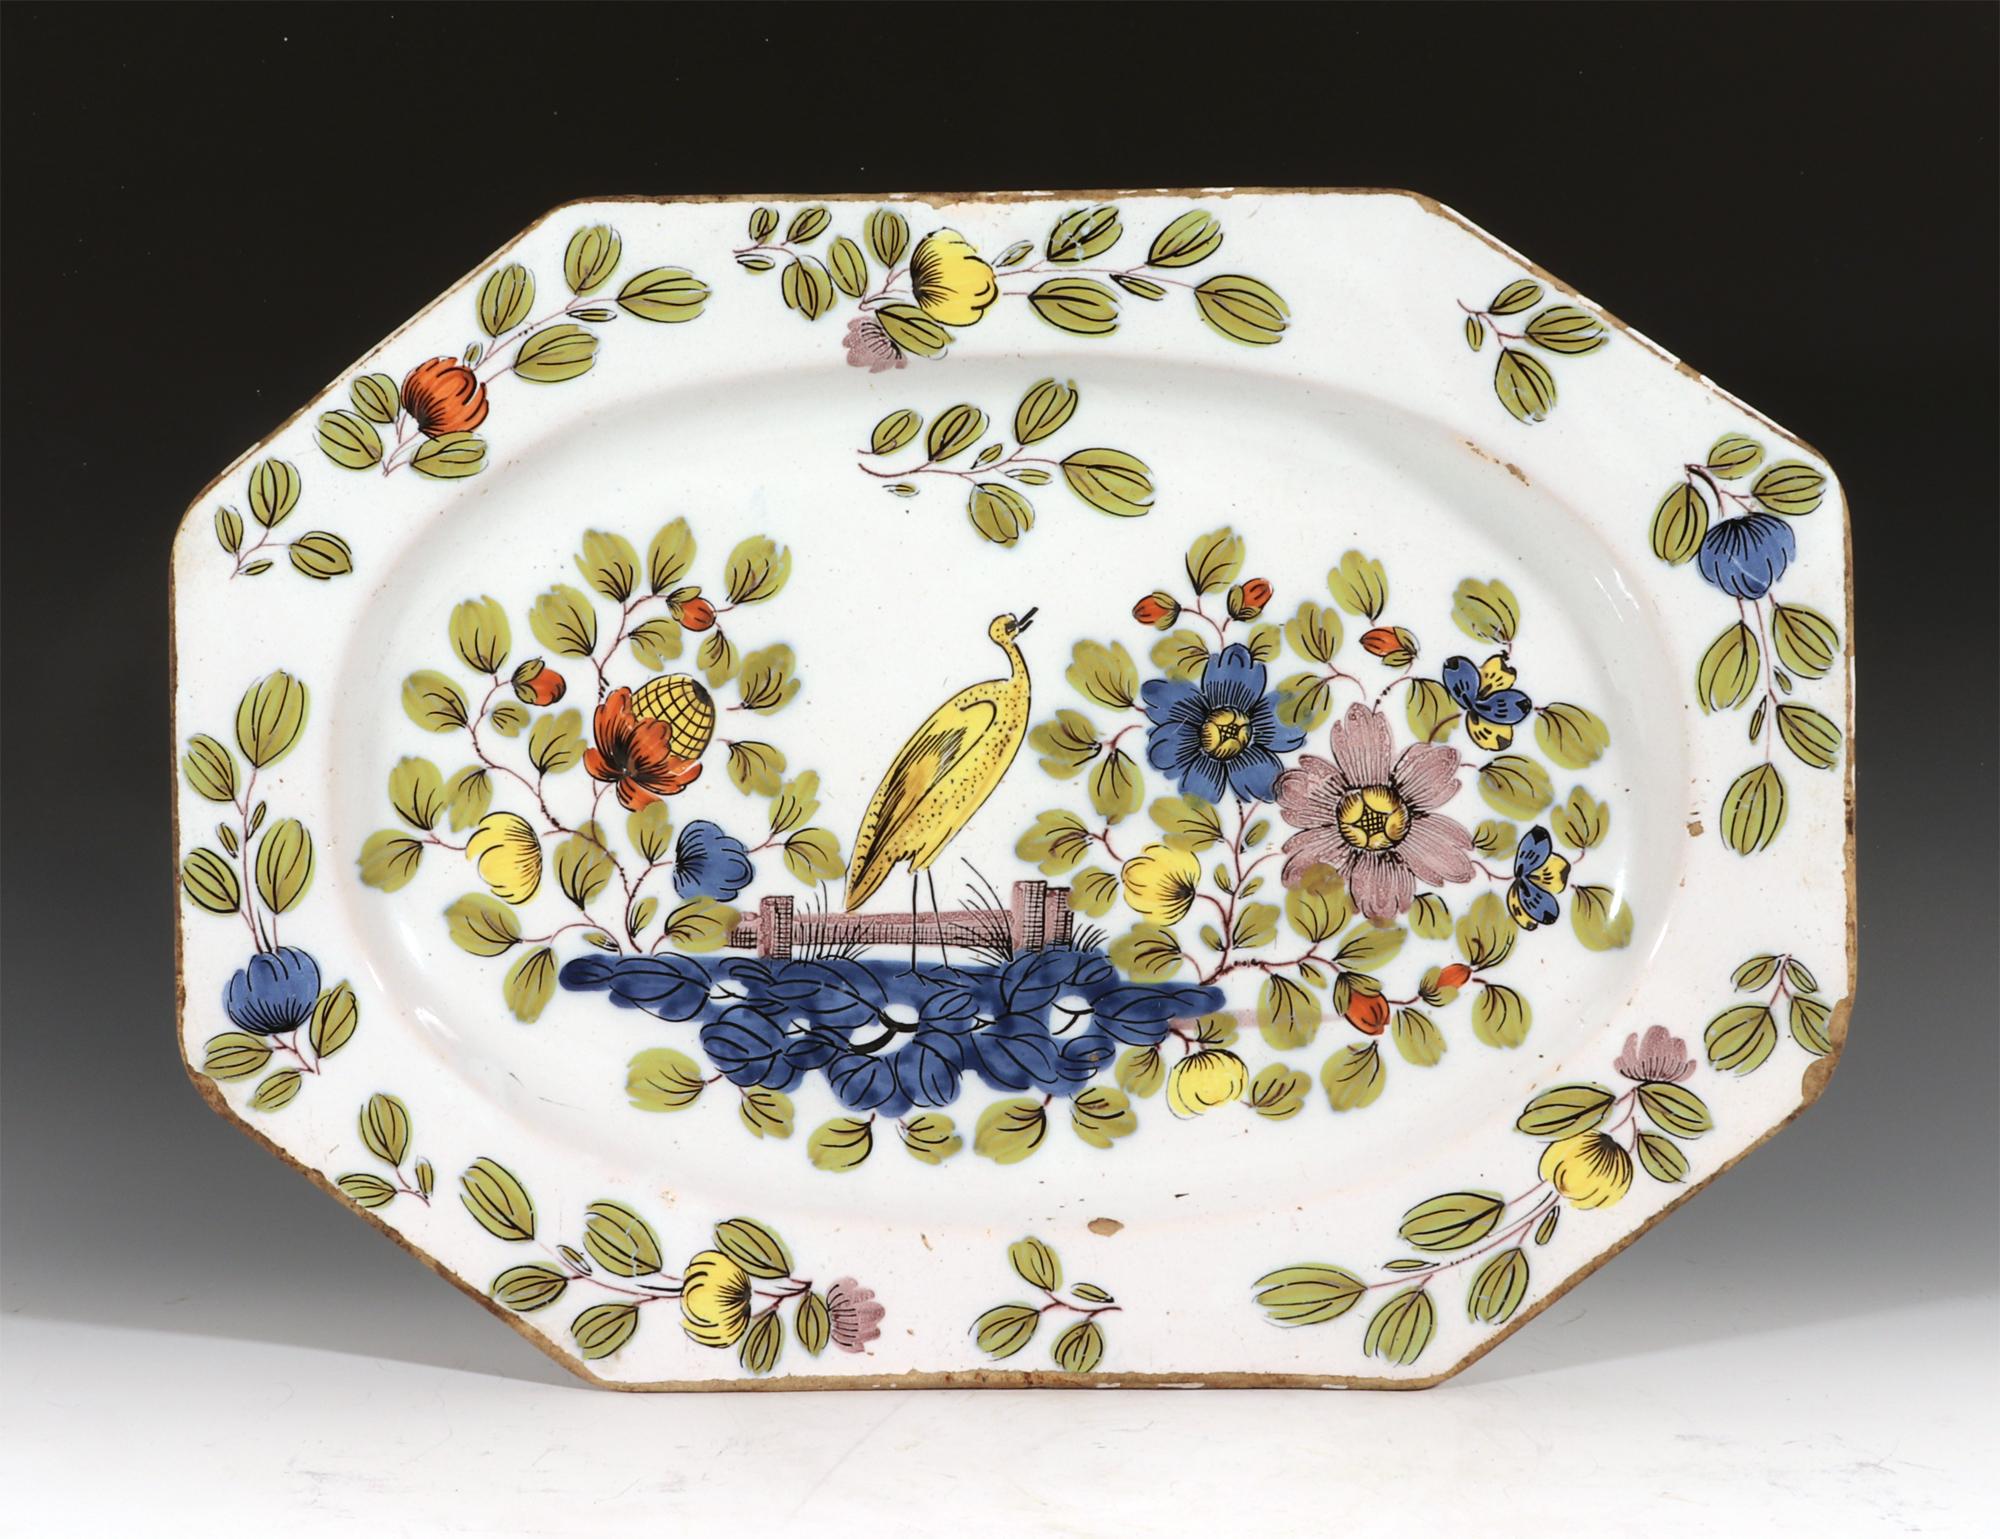 English Liverpool Delftware Fazackerly large dish with bird,
circa 1760

The Liverpool Delftware shaped large dish is painted with an unusual chinoiserie & Bird pattern in the Fazackerly colours of lemon yellow, orange, sage green, dark indigo